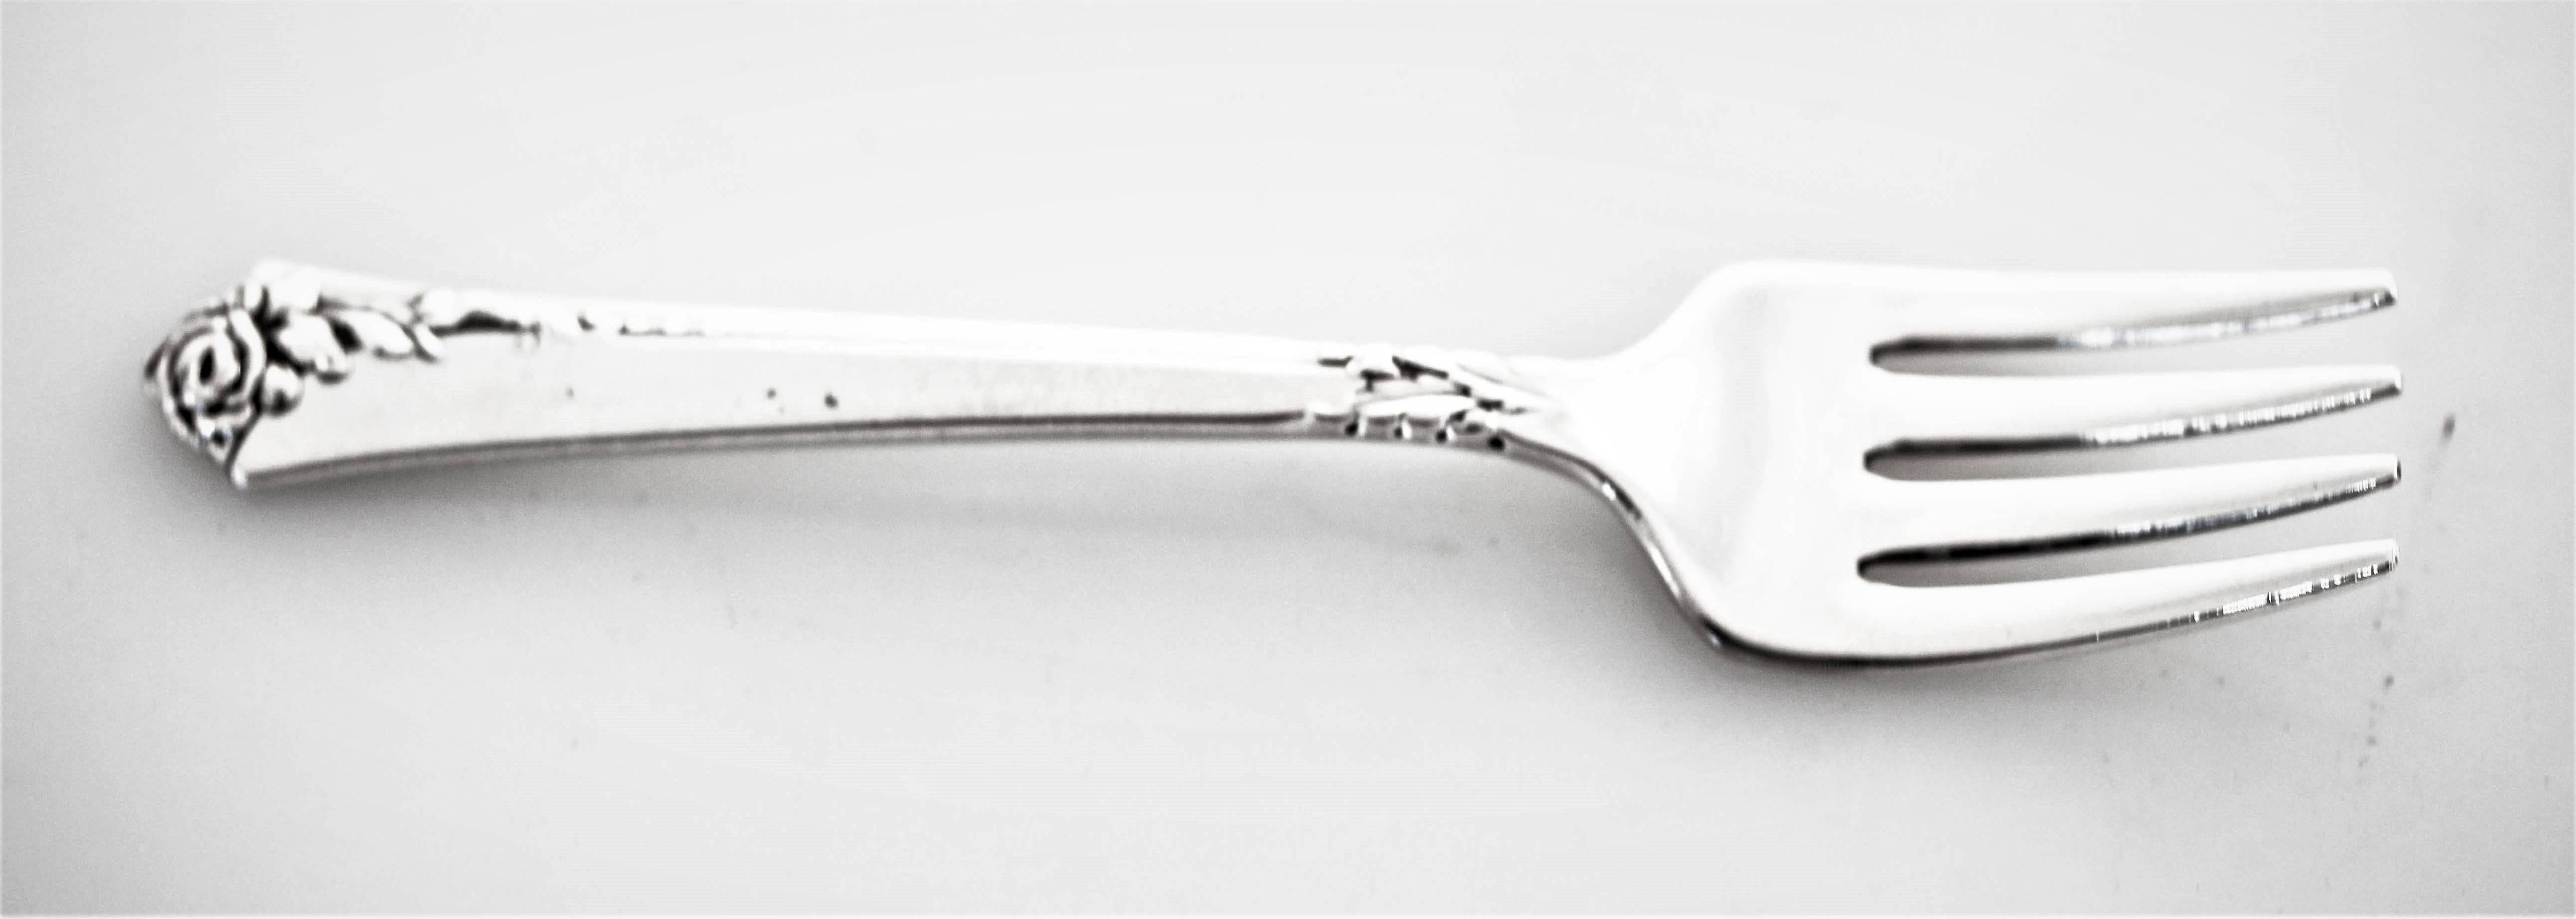 For the new born baby girl (or boy), a lovely fork and spoon set. A gentle rose at the very top with a few leaves beneath it. Give the gift that lasts forever; give them their first piece of silver.
 